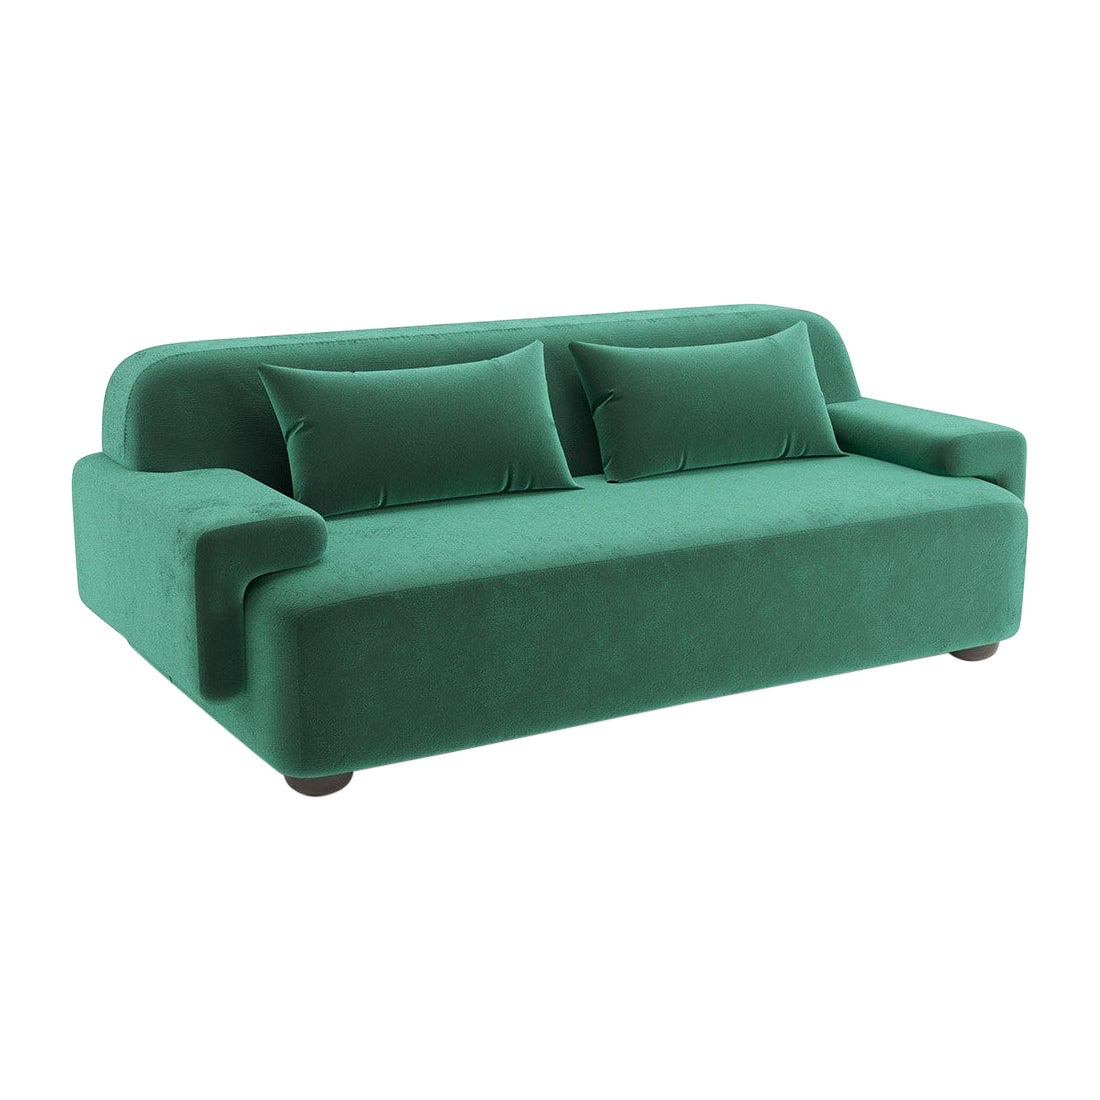 Popus Editions Lena 3 Seater Sofa in Green '772256' Como Velvet Upholstery For Sale